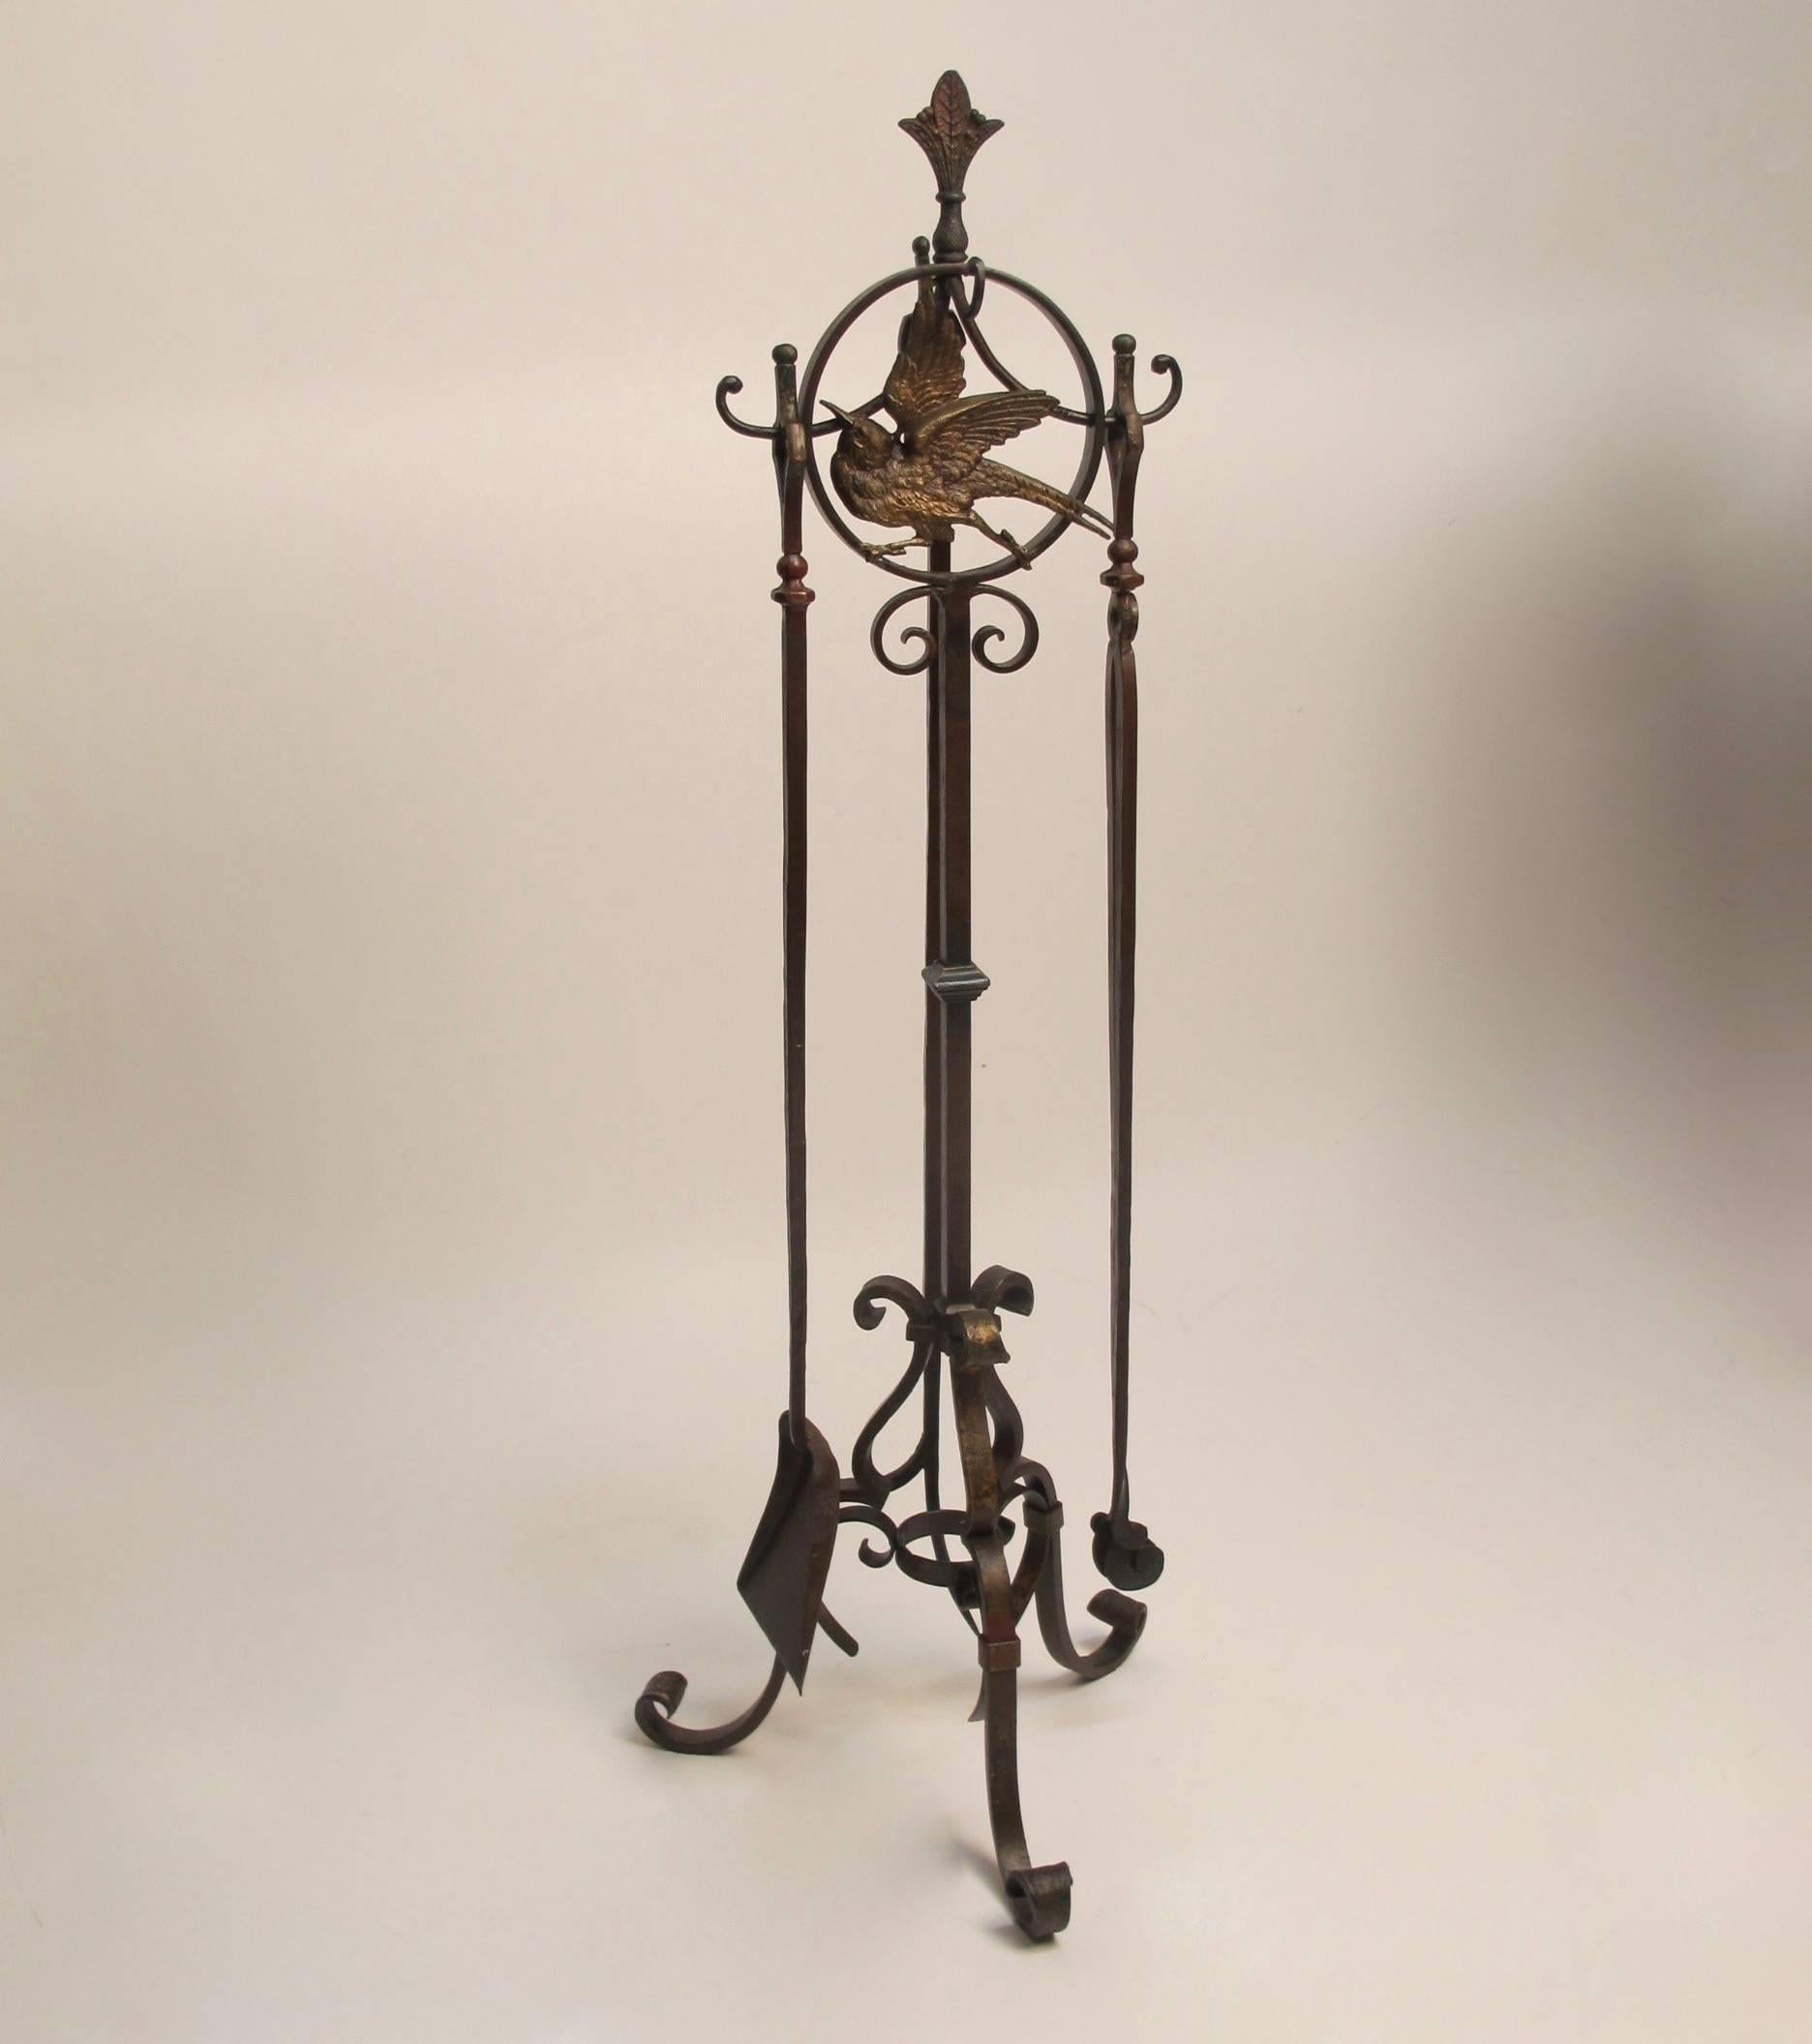 Arts & Crafts period hand-forged iron fireplace stand and tools with cast brass bird detail, retaining much of the original paint. Four tools consisting of a poker, tongs, shovel and a brush.